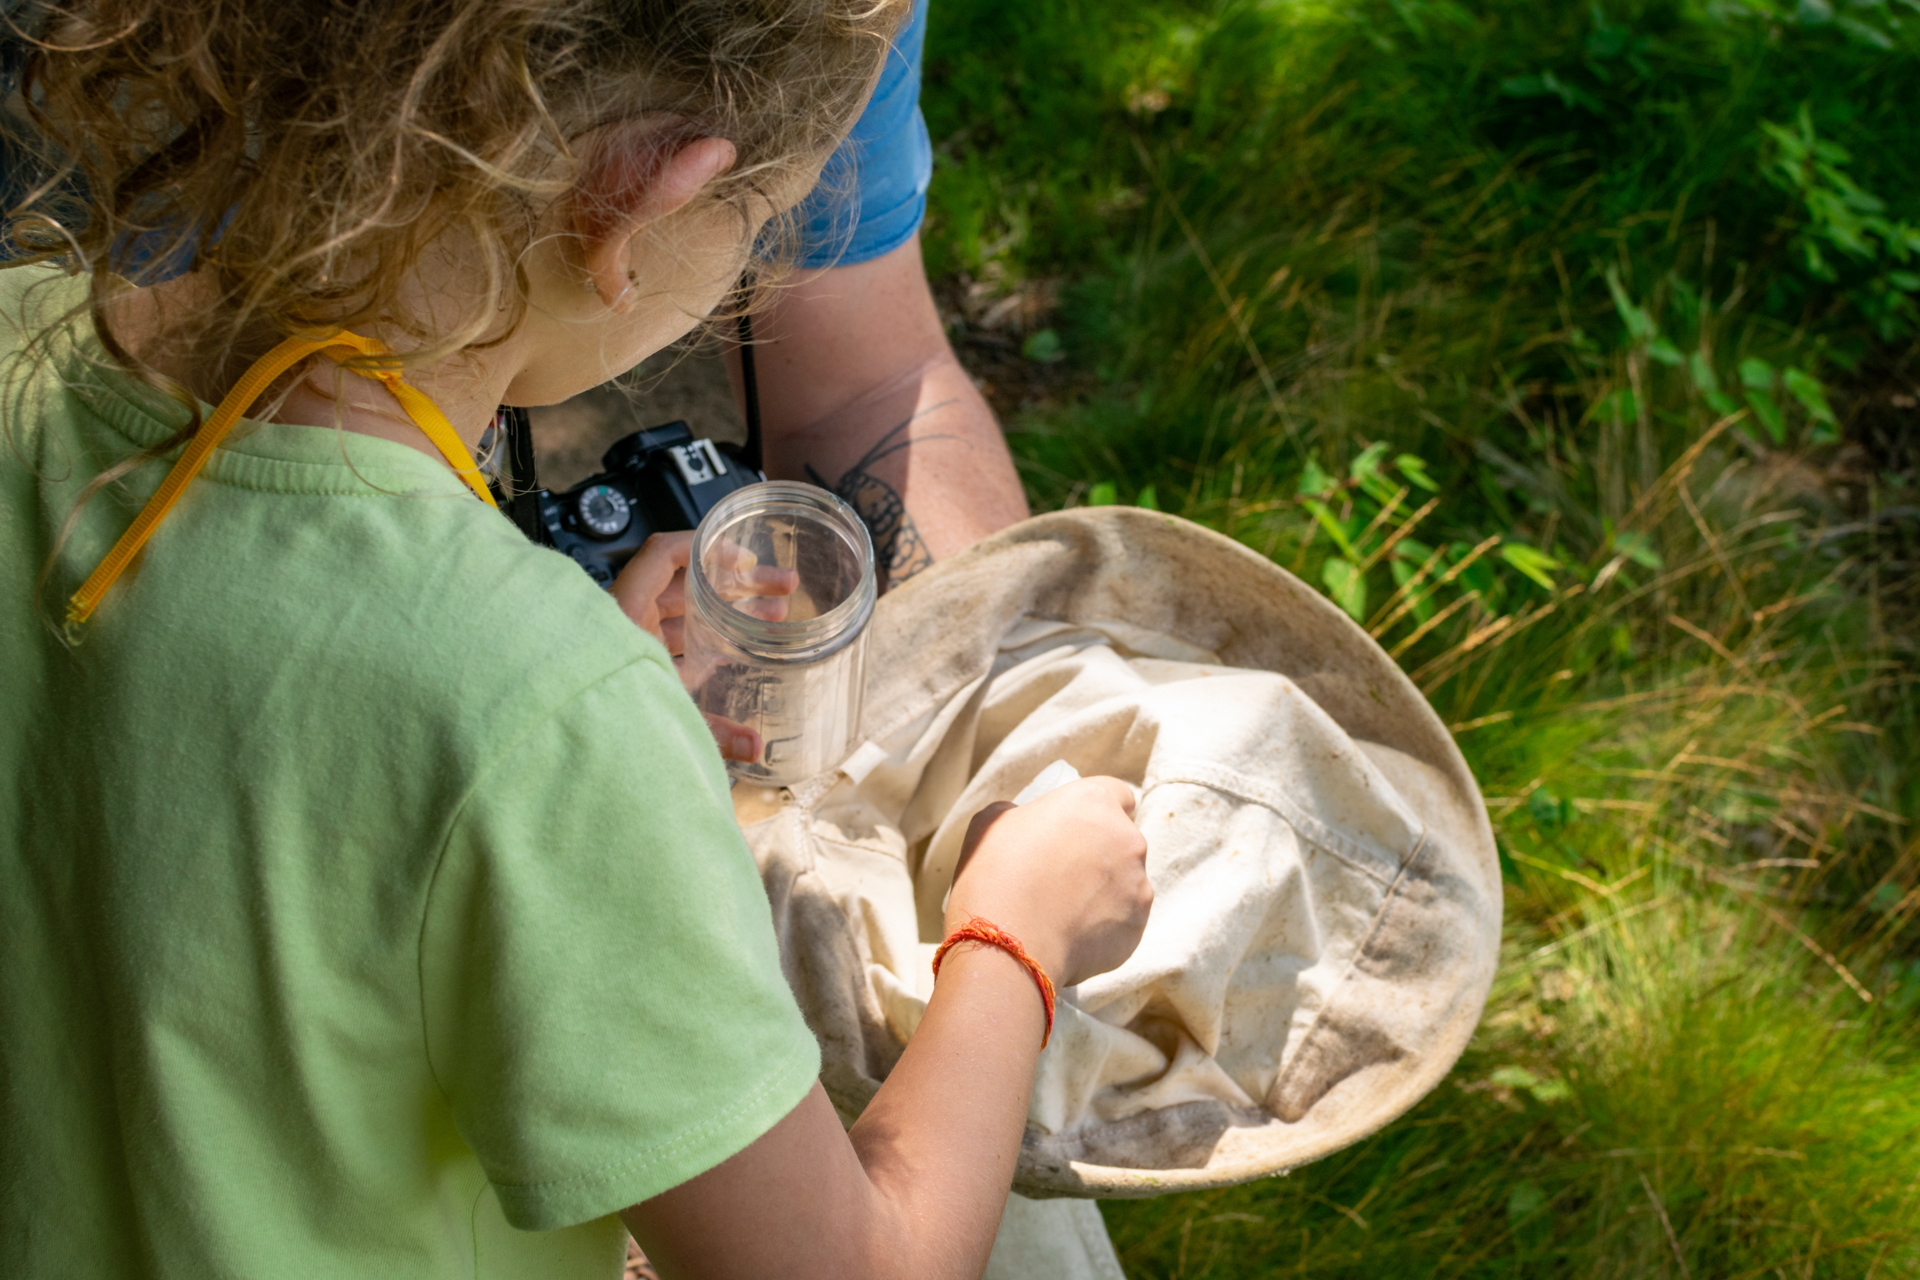 A Broadmoor camper wearing a green t-shirt reaches into a canvas bug net held by a counselor while holding a clear specimen jar in her other hand